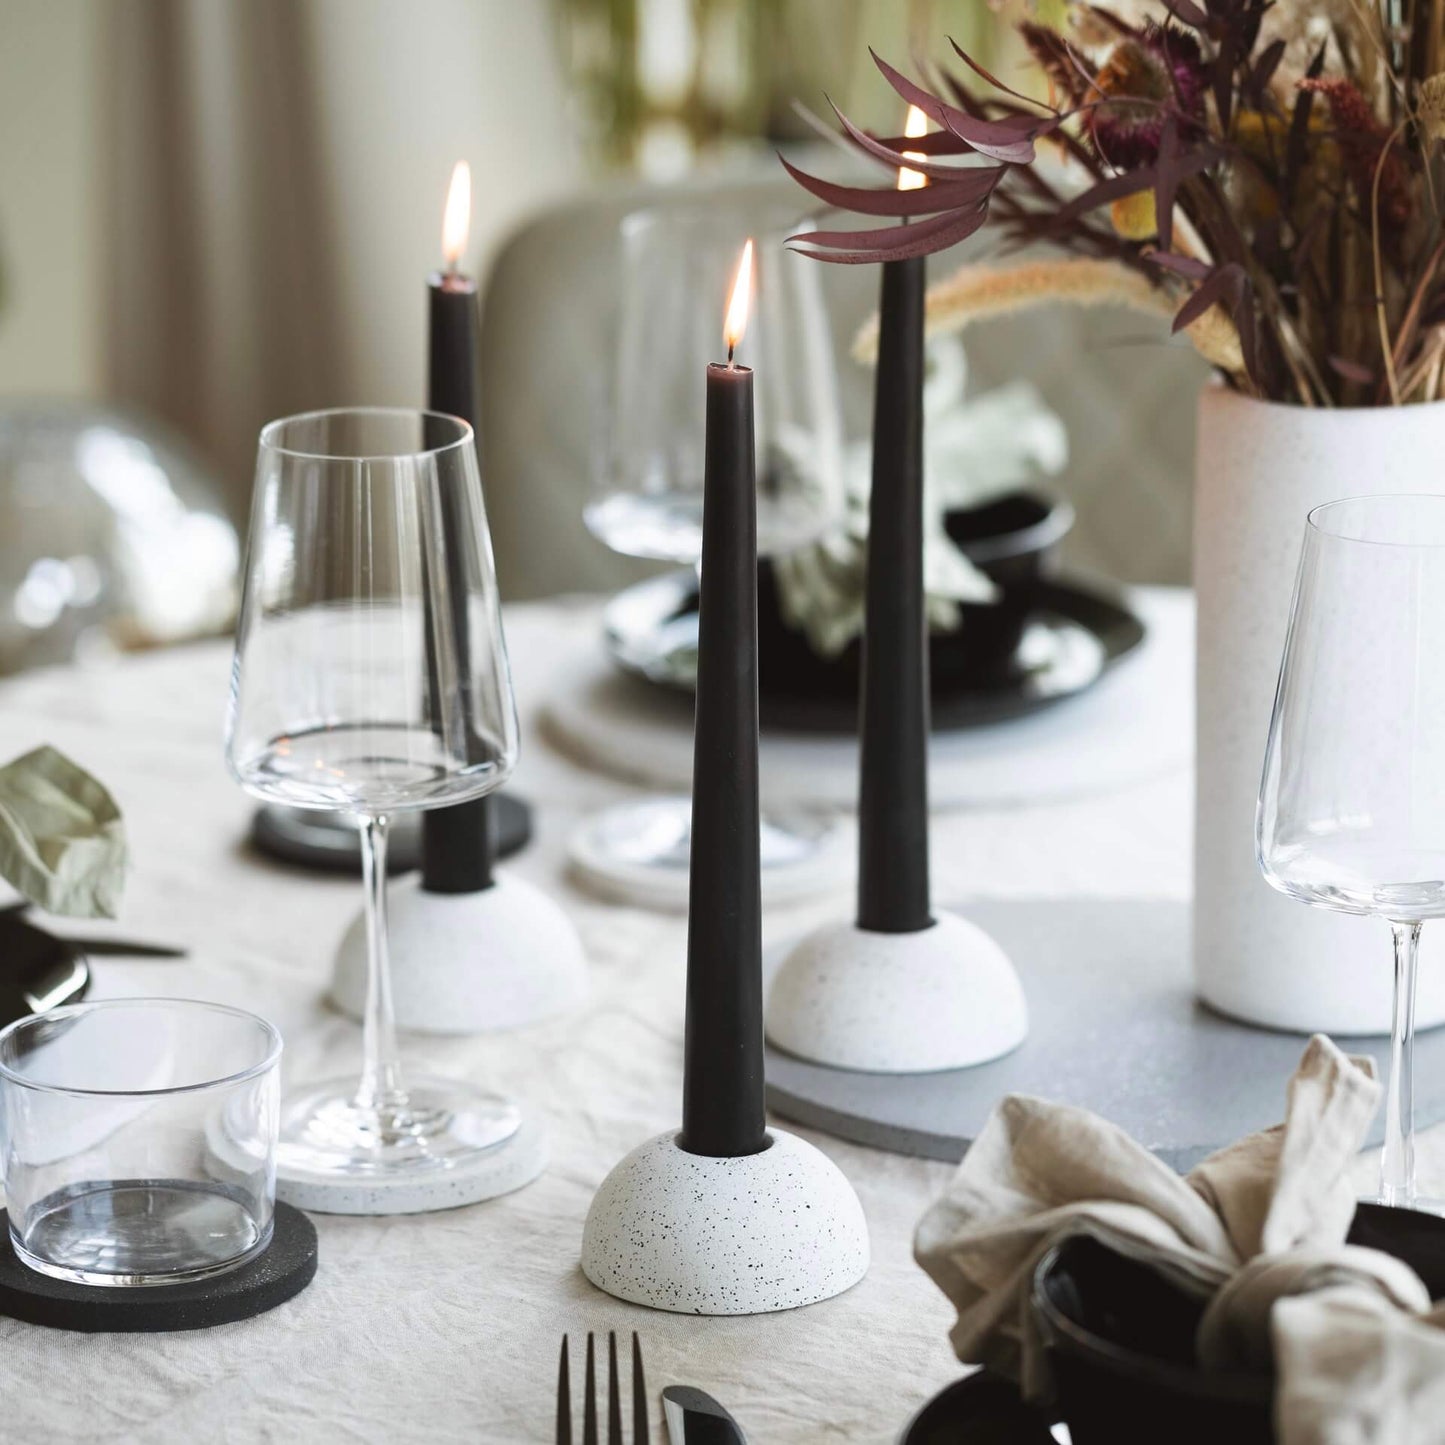 white eco concrete dome shaped candle holders in a tableware setting